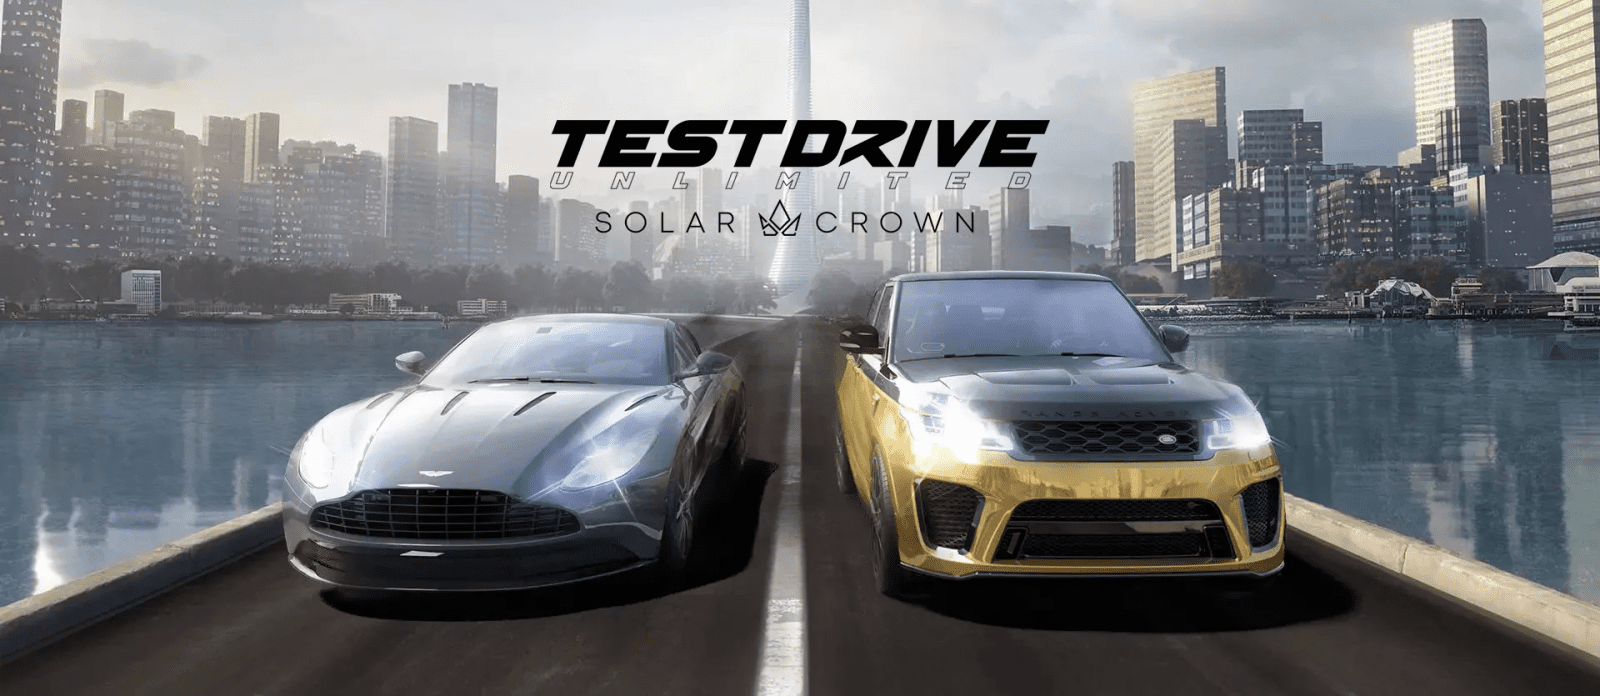 Aston Martin DB11 and Range Rover in the front of shot with the Test Drive Unlimited Solar Crown logo above and Hong Kong in the backdrop